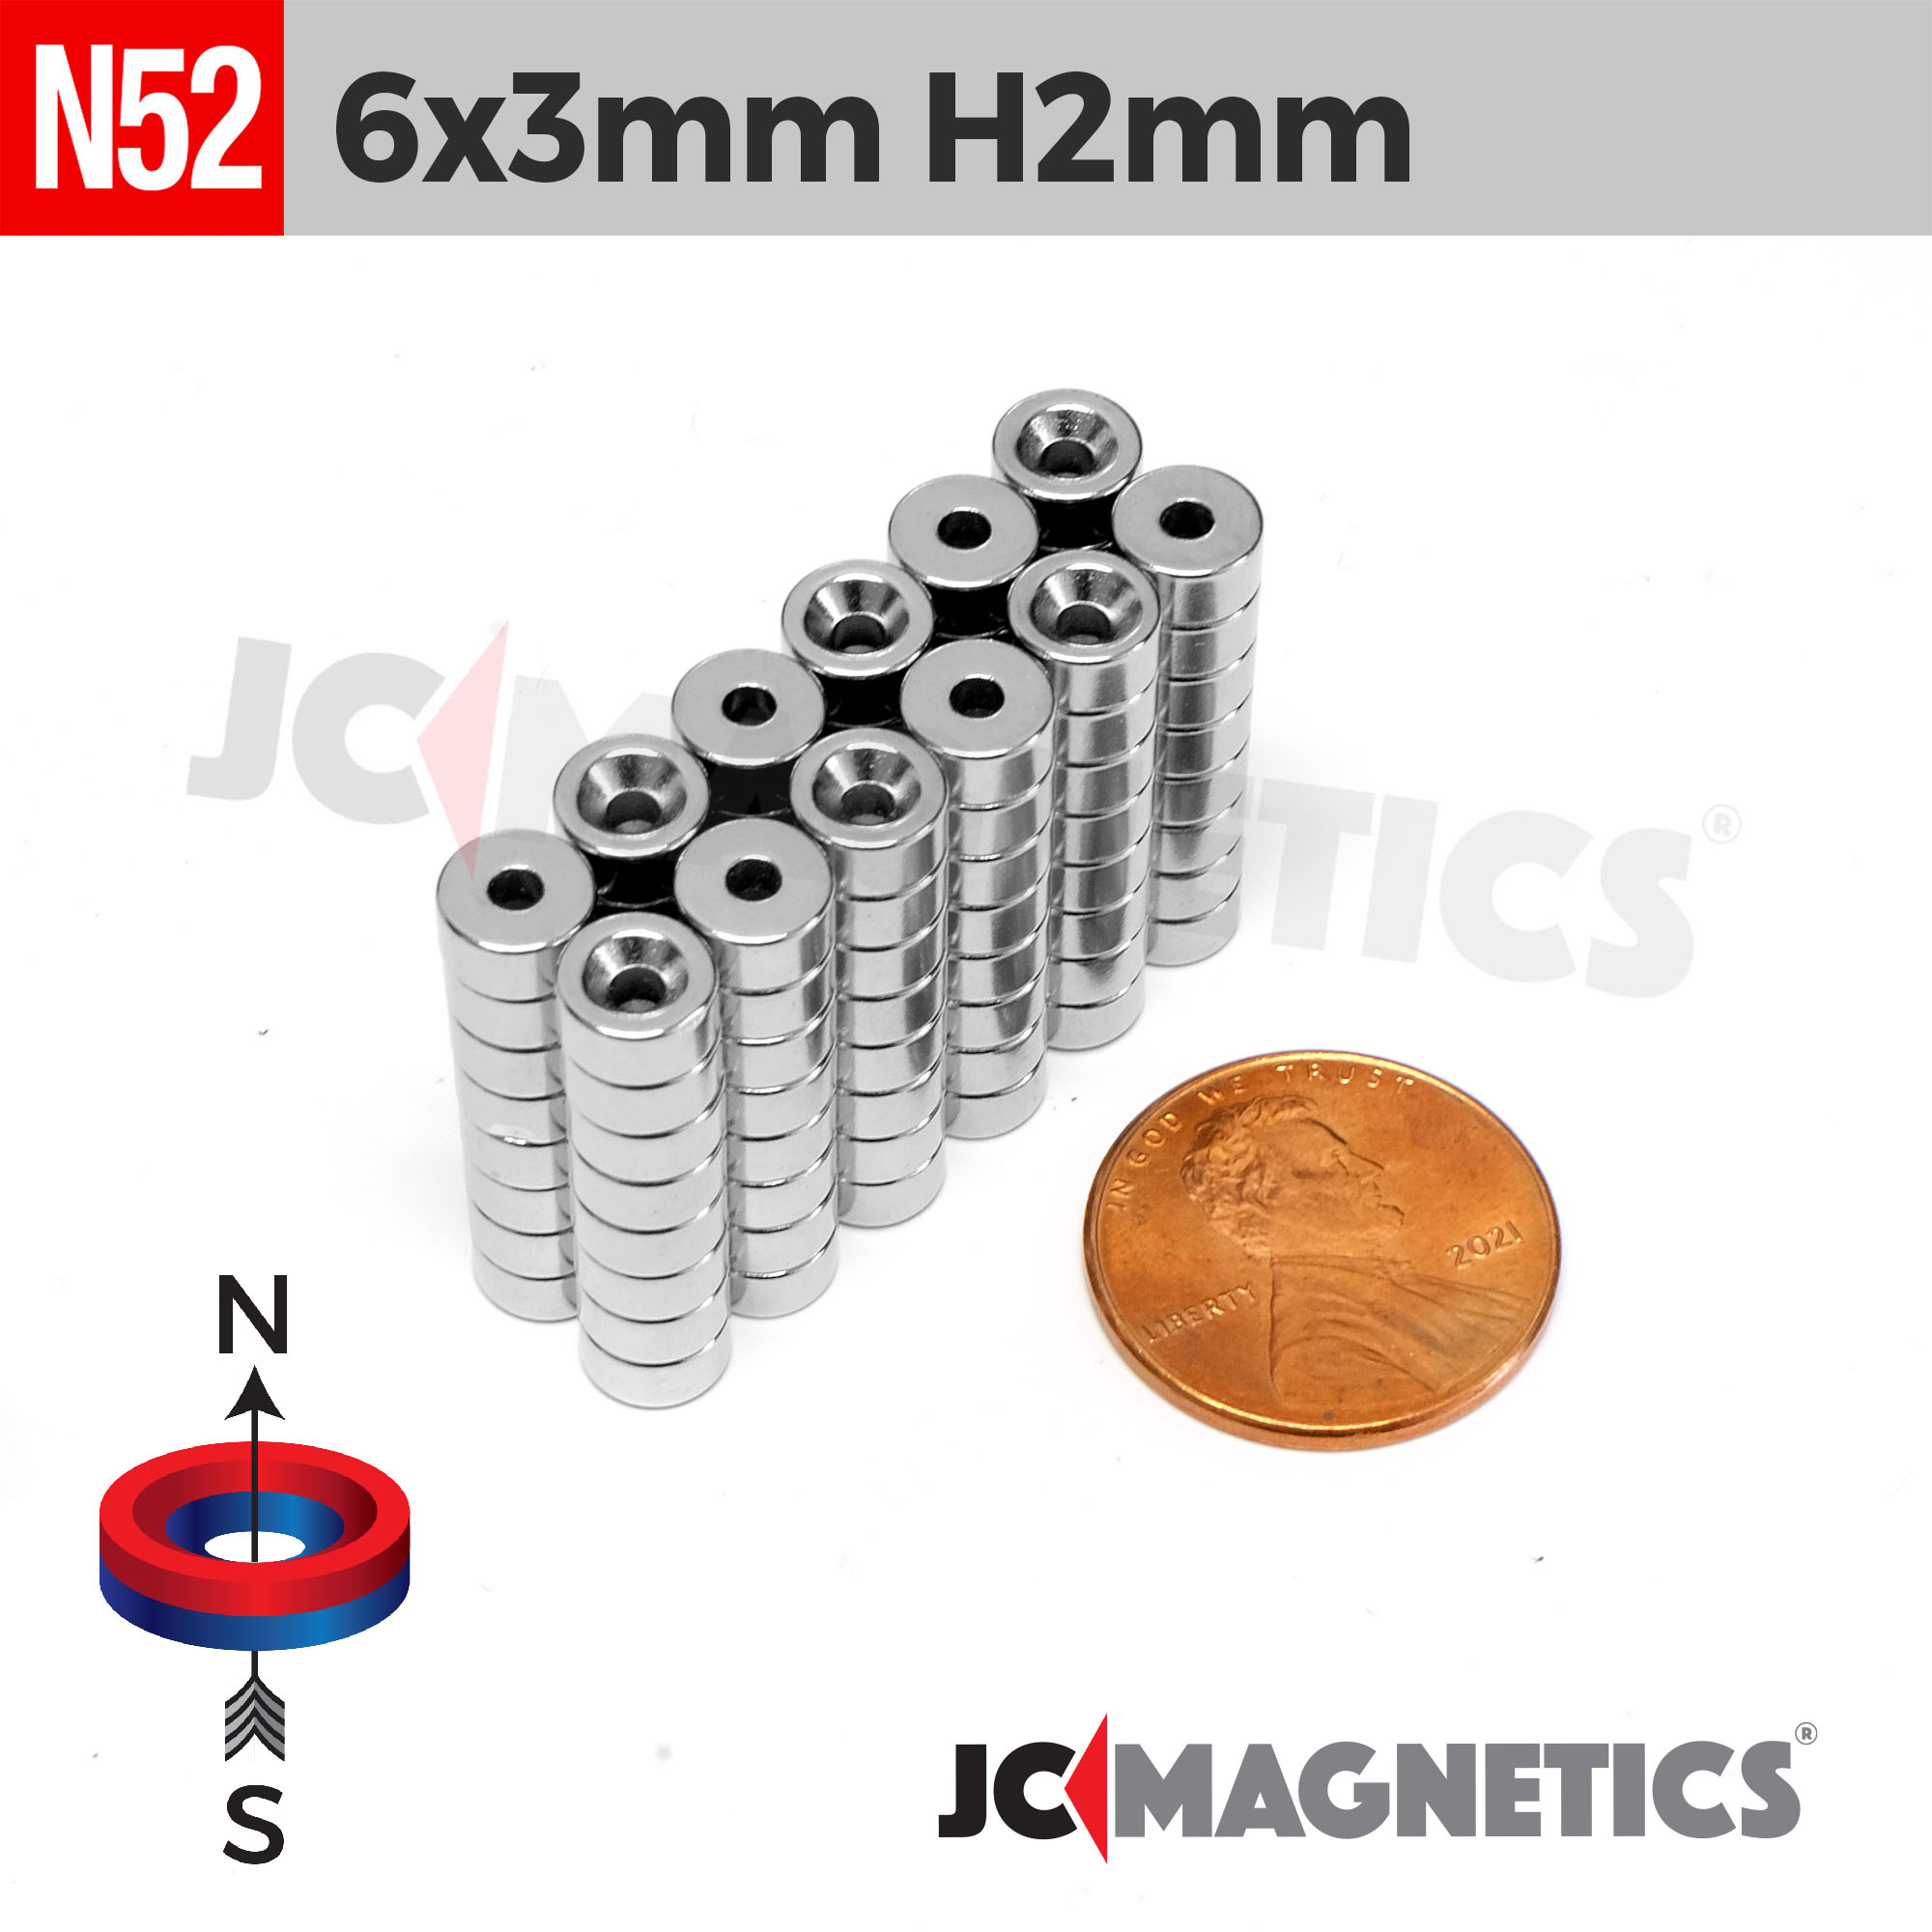 6mm diameter x 3mm thickness, hole 2mm (approx. 1/5in x 1/8in hole